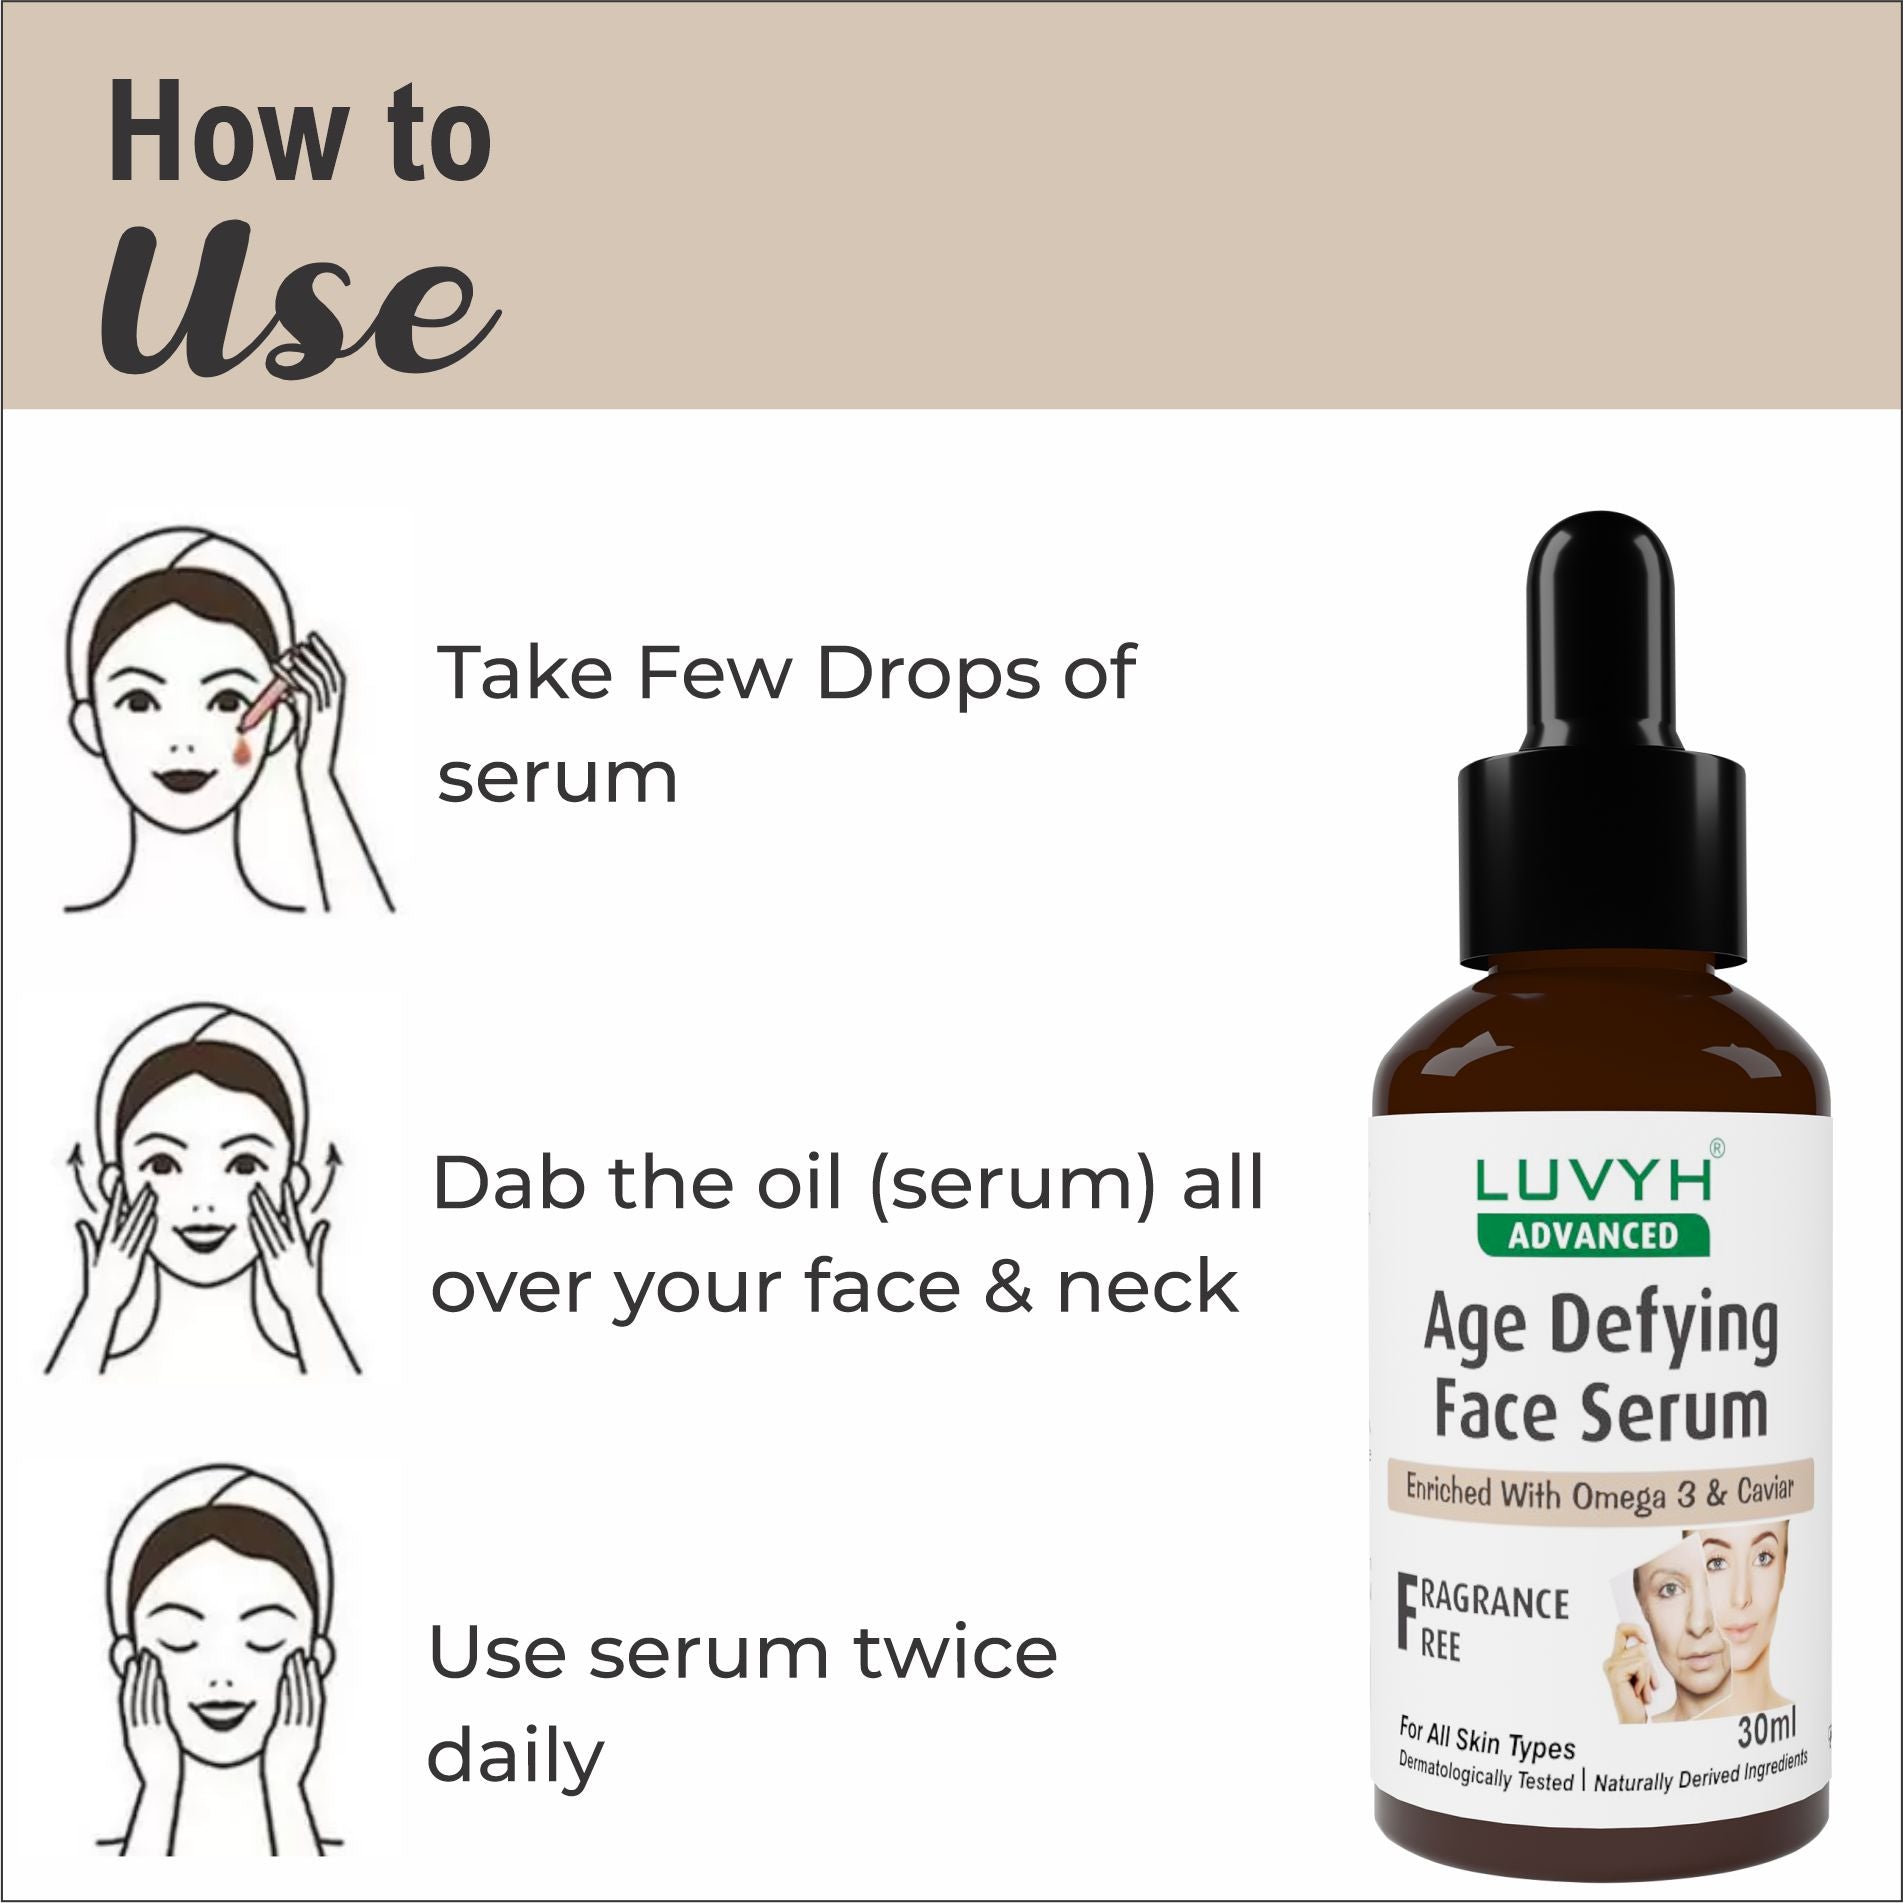 How to use Age Defying Face Serum 